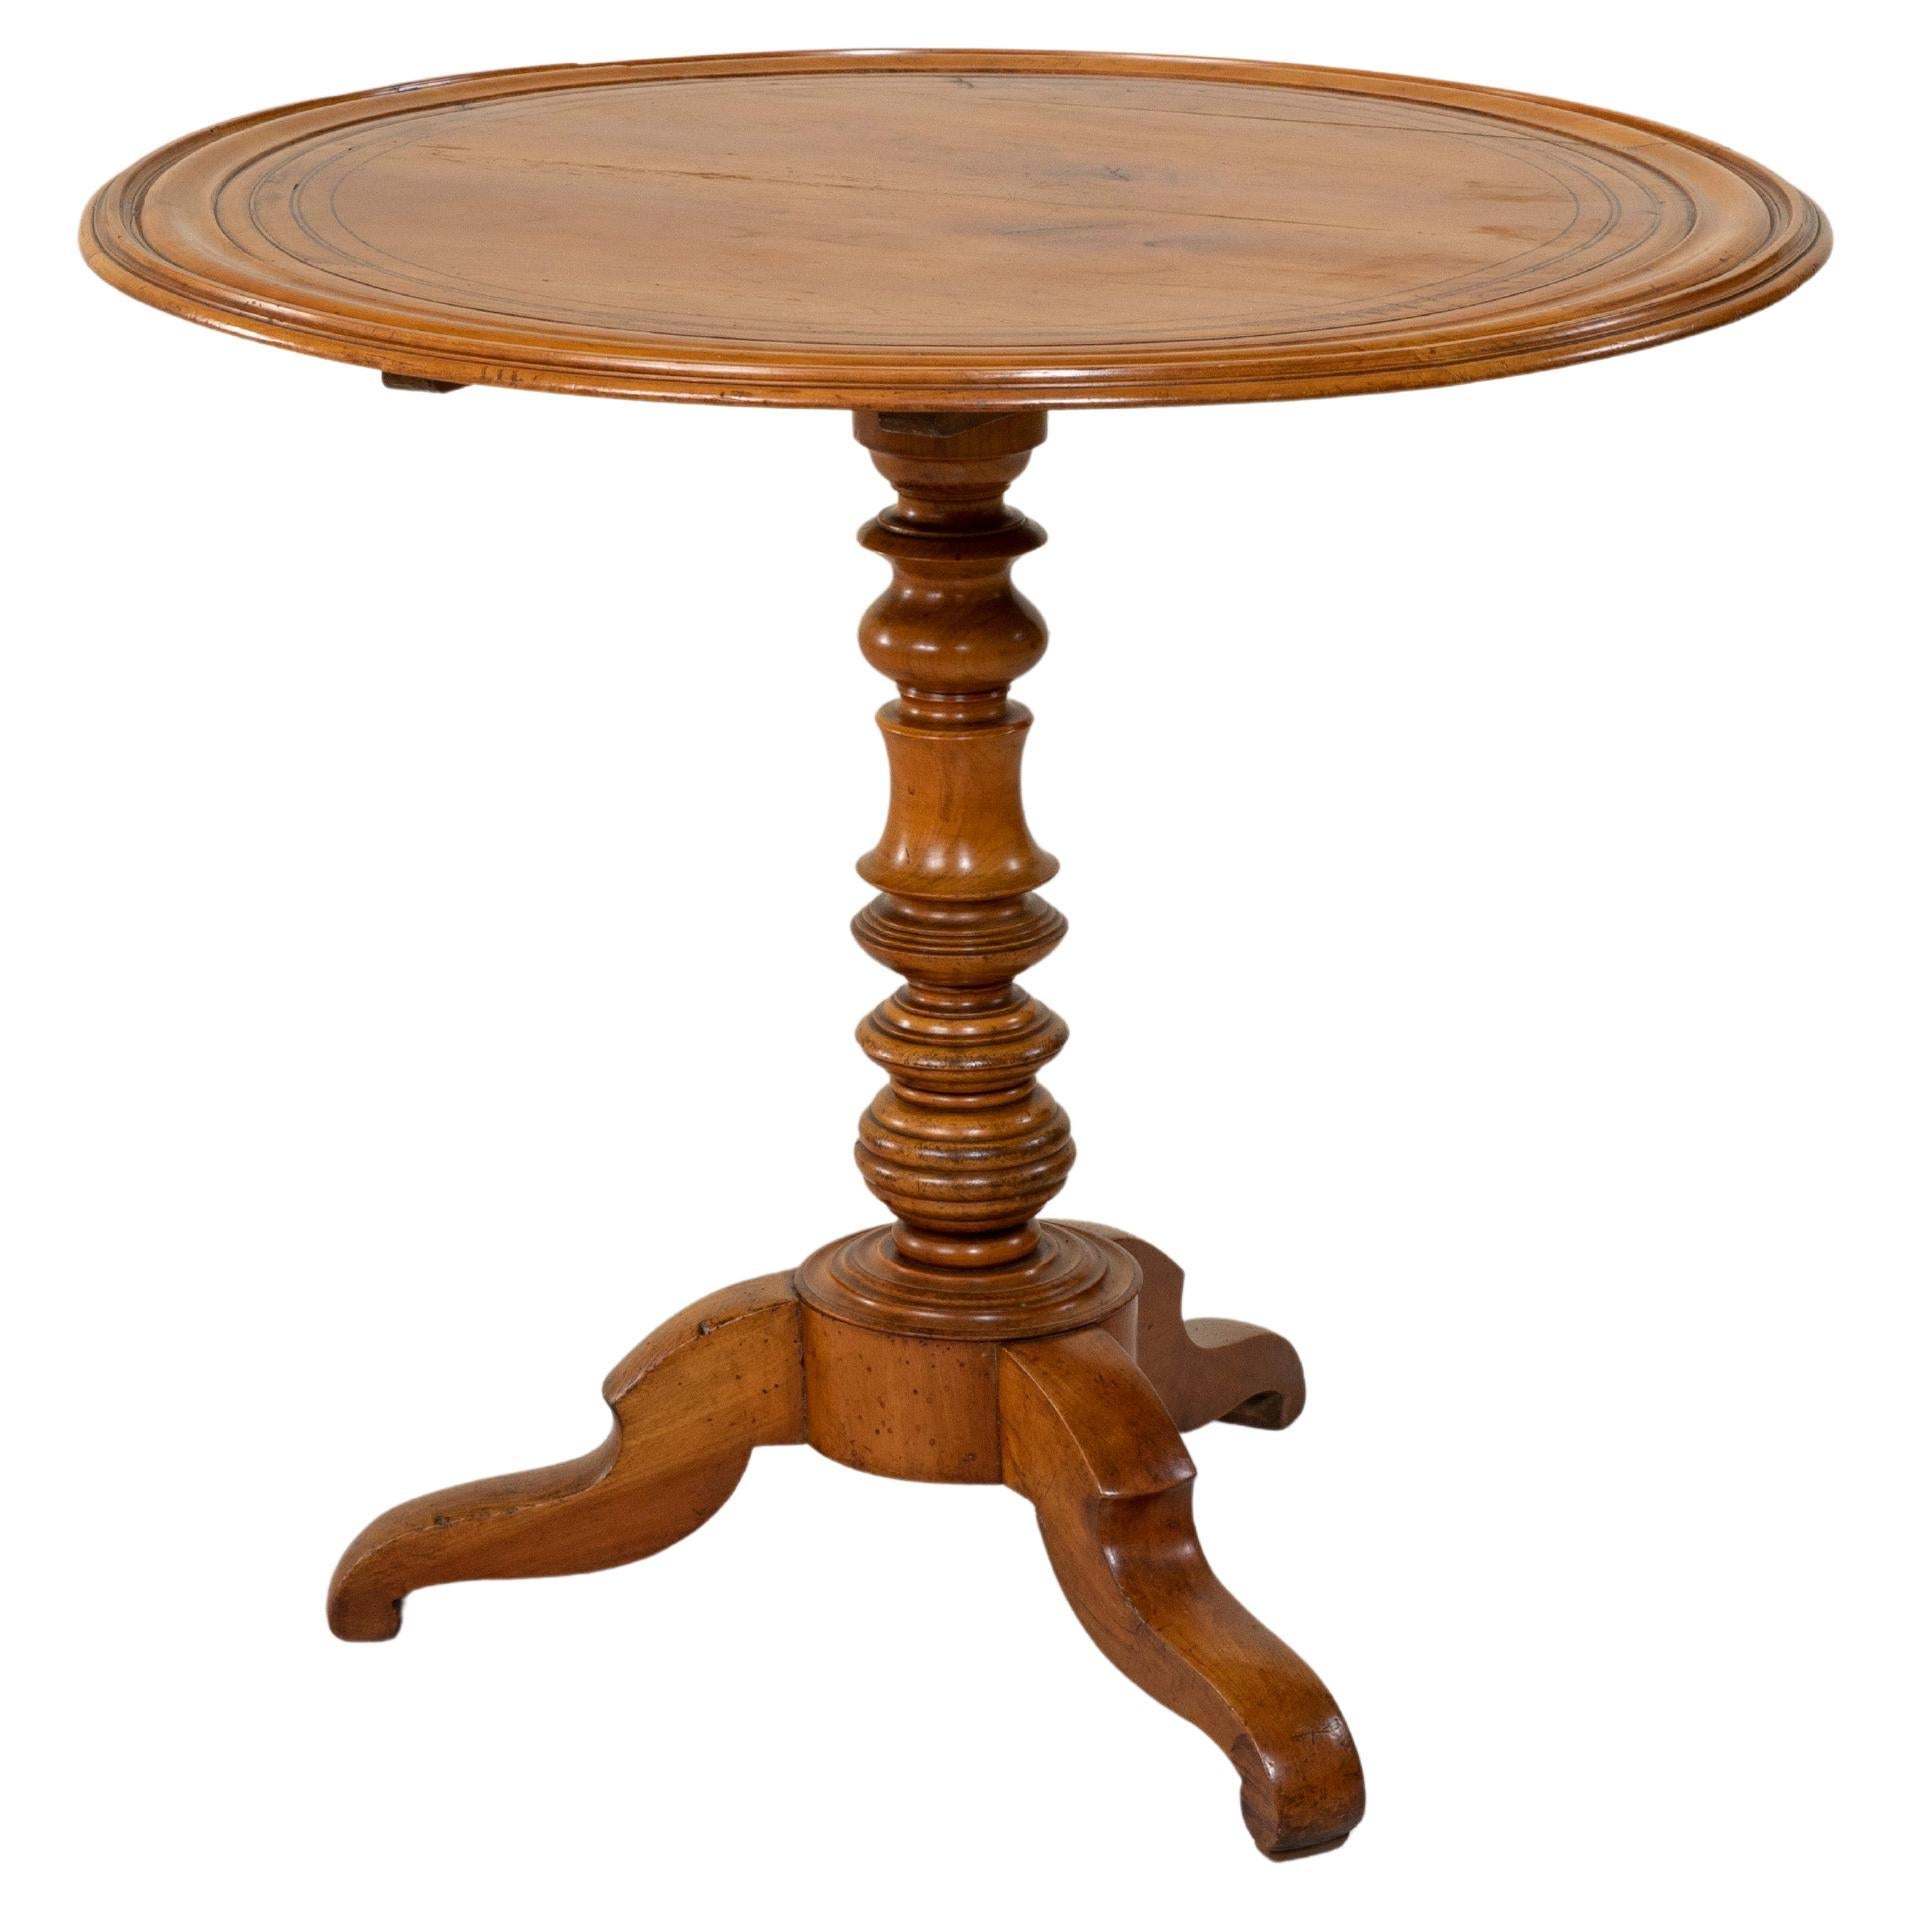 Mid-19th Century French Louis Philippe Period Walnut Gueridon or Pedestal Table For Sale